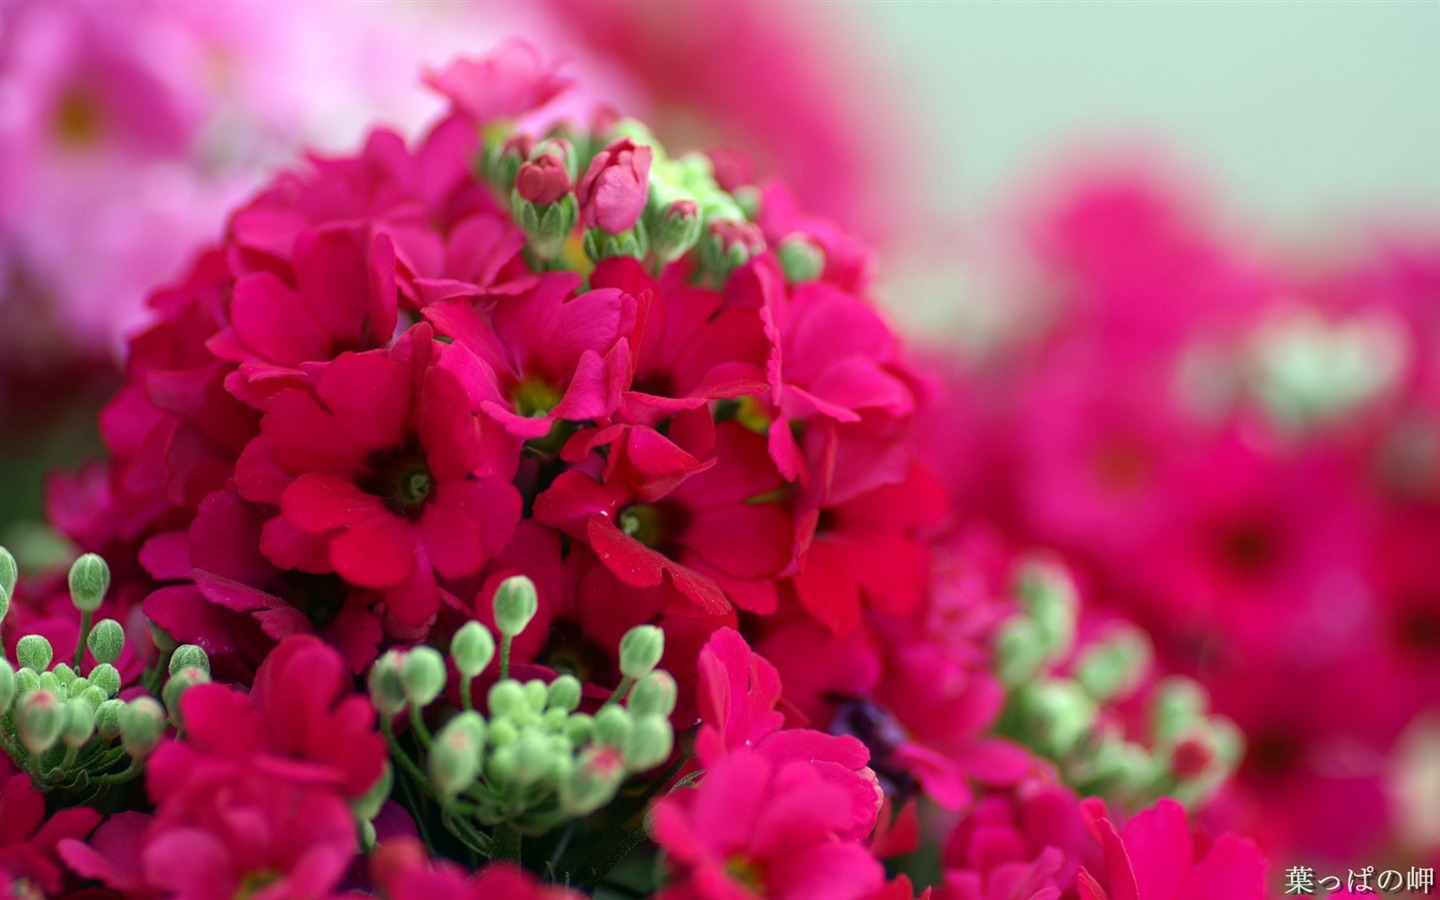 Personal Flowers HD Wallpapers #27 - 1440x900